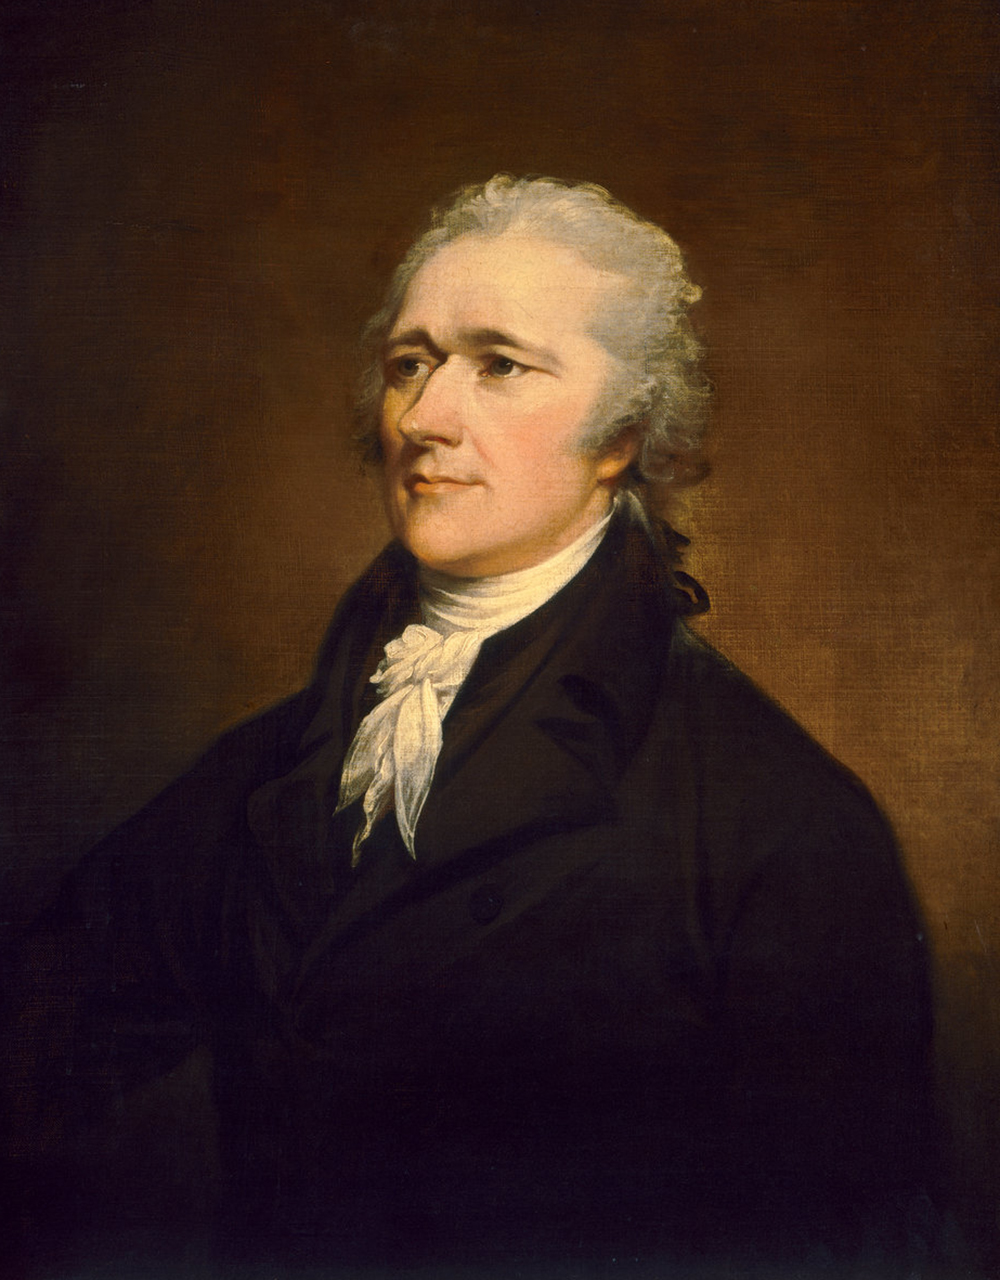 Alexander Hamilton, by John Trumbull, c. 1806. National Gallery of Art, Andrew W. Mellon Collection.